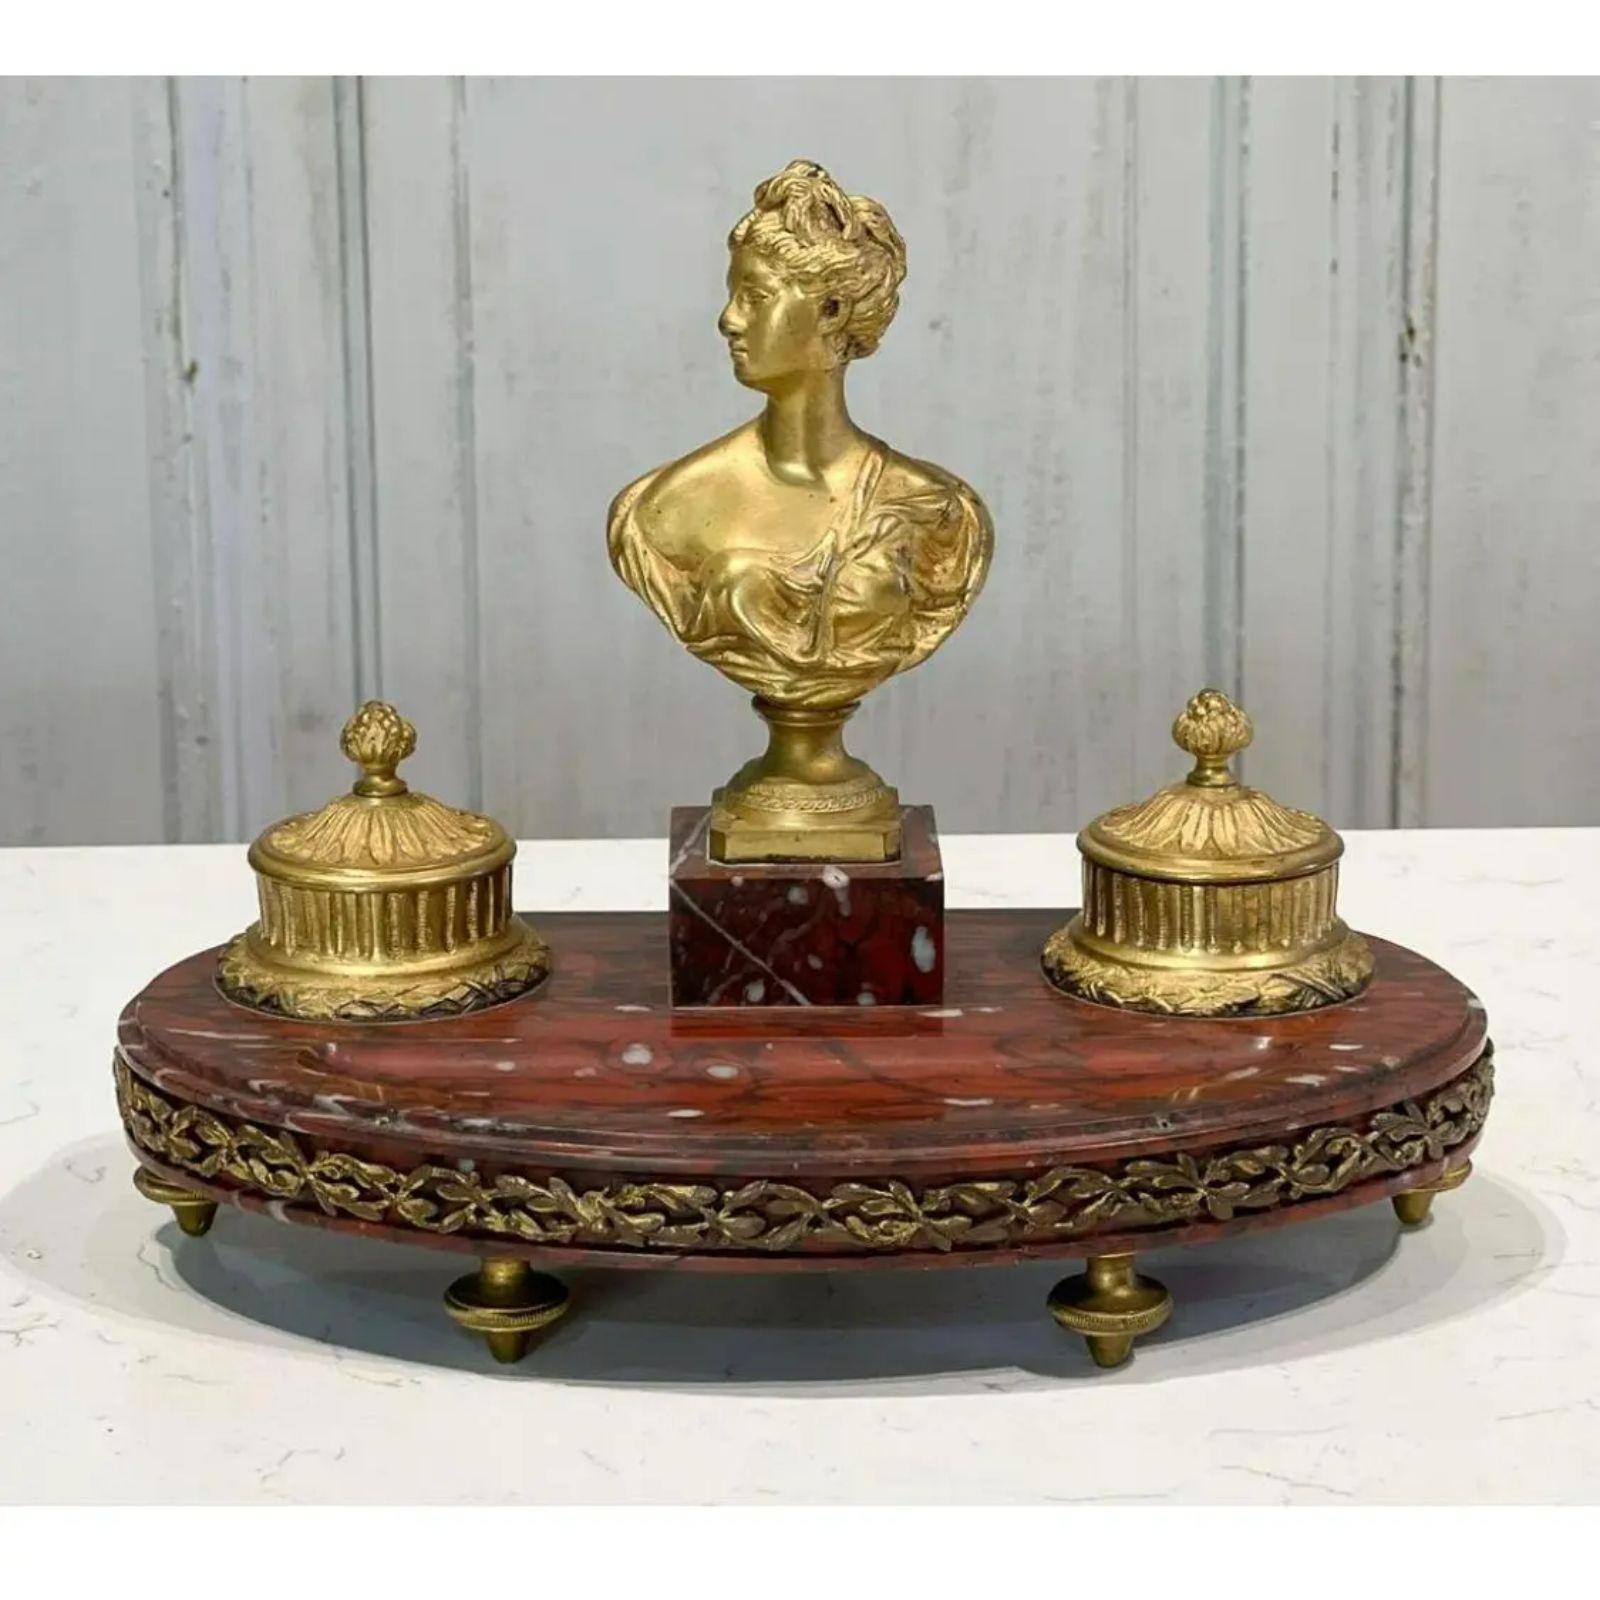 Antique French Gilt Bronze Inkwell on Rouge Marble Stand, 19th Century For Sale 1